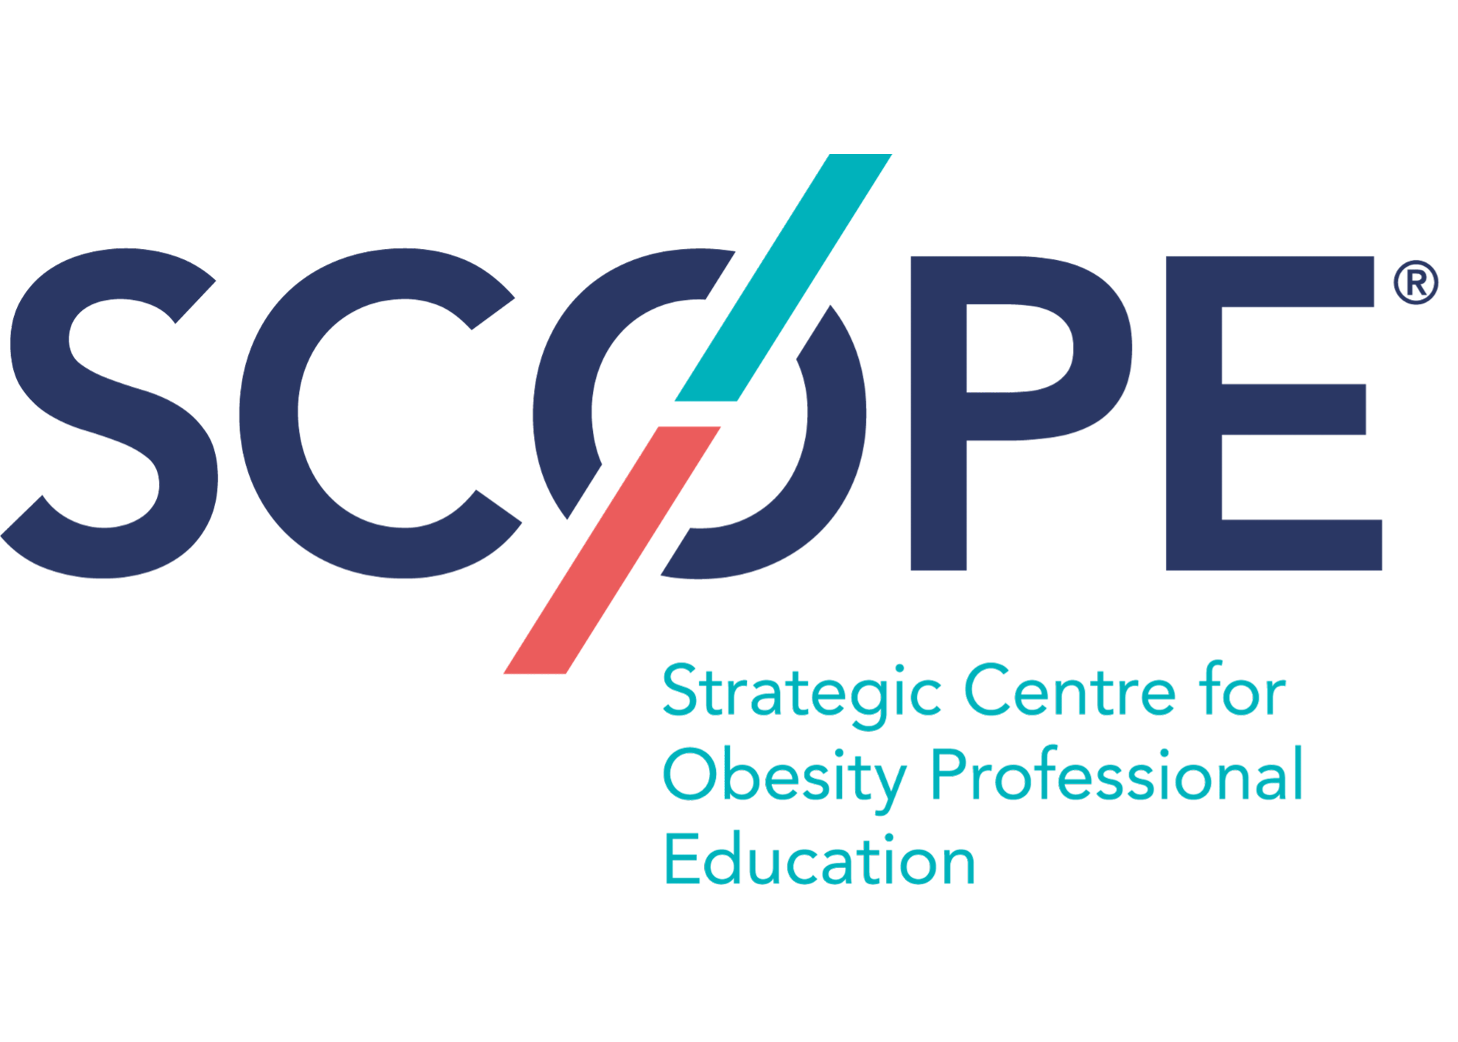 Strategic Centre for Obesity Professional Education